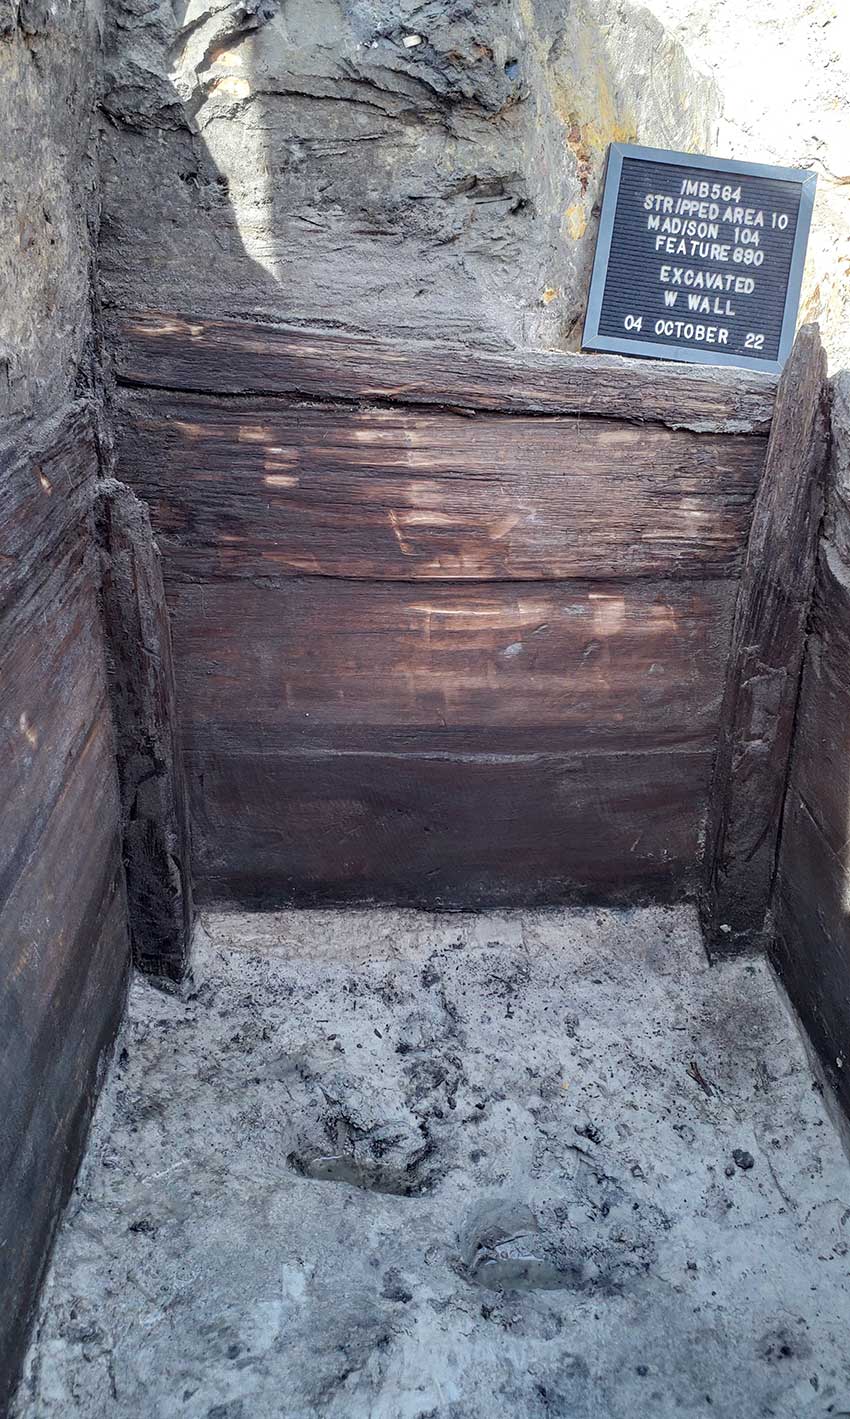 A wood-lined privy (Feature 690) that contained remains of fruits and other foods, including grape, muscadine, blackberry, raspberry, passionflower, peanut shells, chinaberry, cherry/plum, peach, gourd, coffee beans, hickory nut, mango, prickly pear, and grain. Archaeologists can study past diets through these plant remains